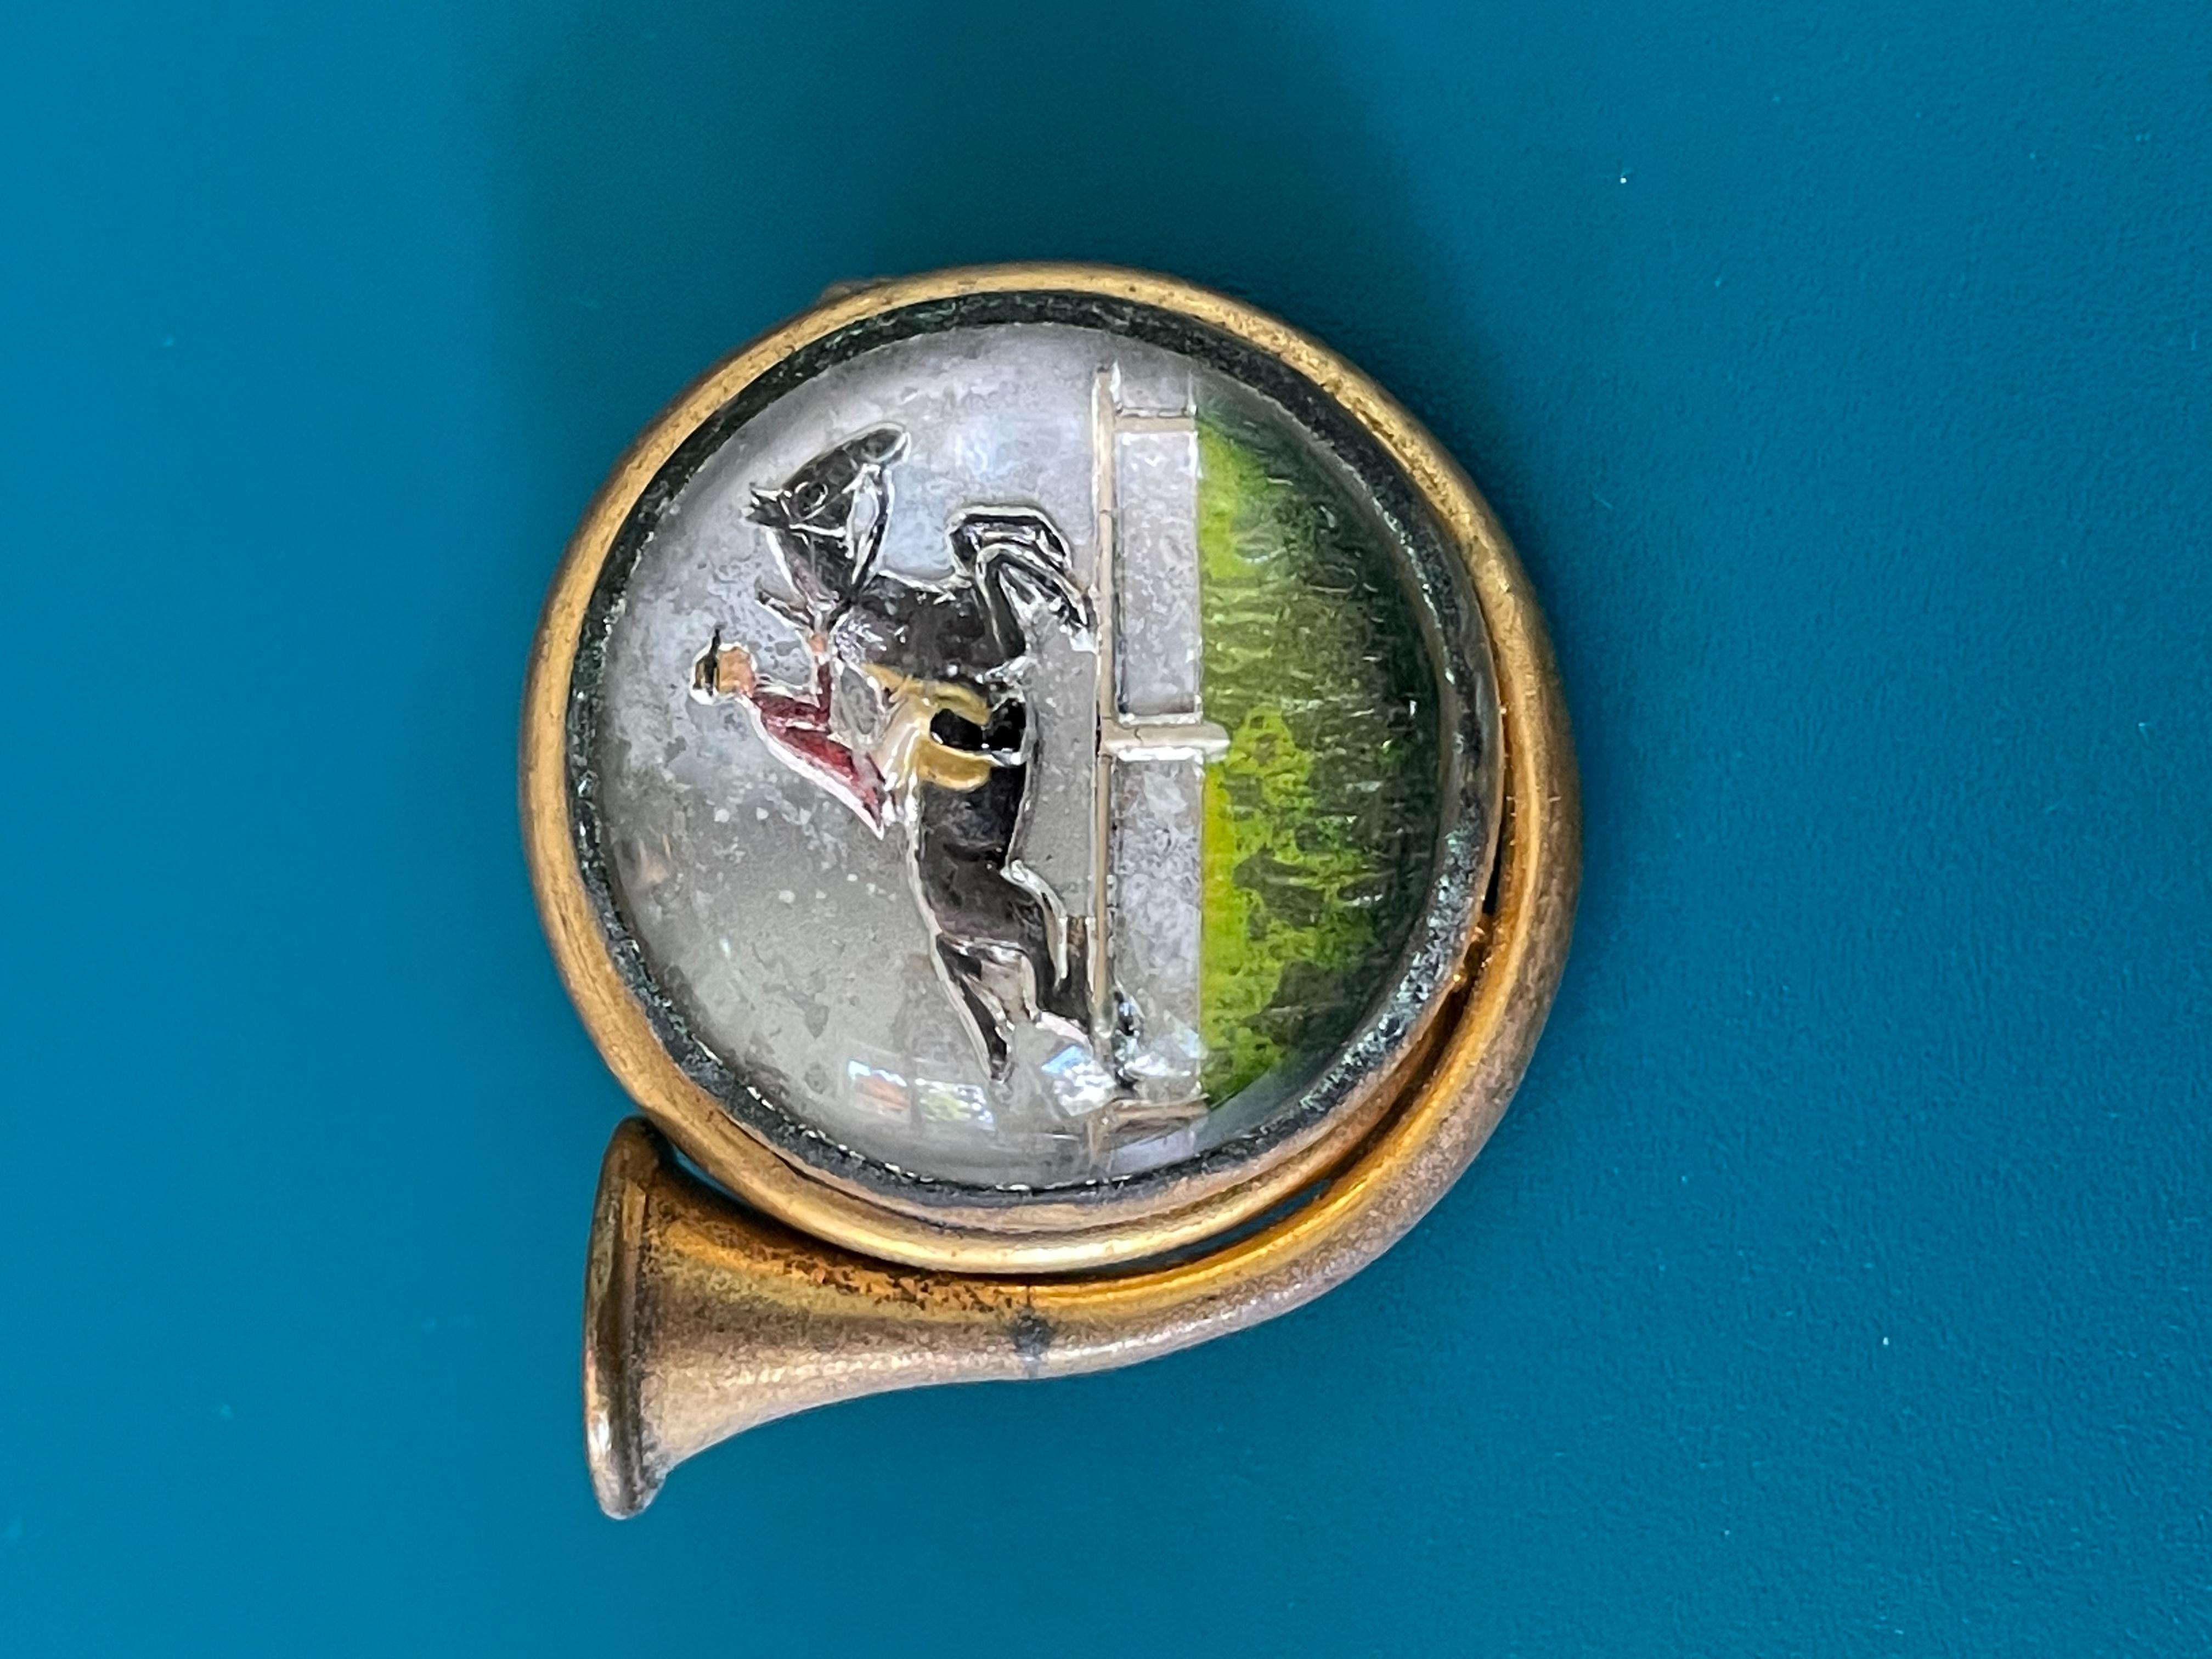 Vintage French Horn Reverse Painted Essex Crystal Brooch Pin with Horse, Rider In Good Condition For Sale In St. Louis Park, MN